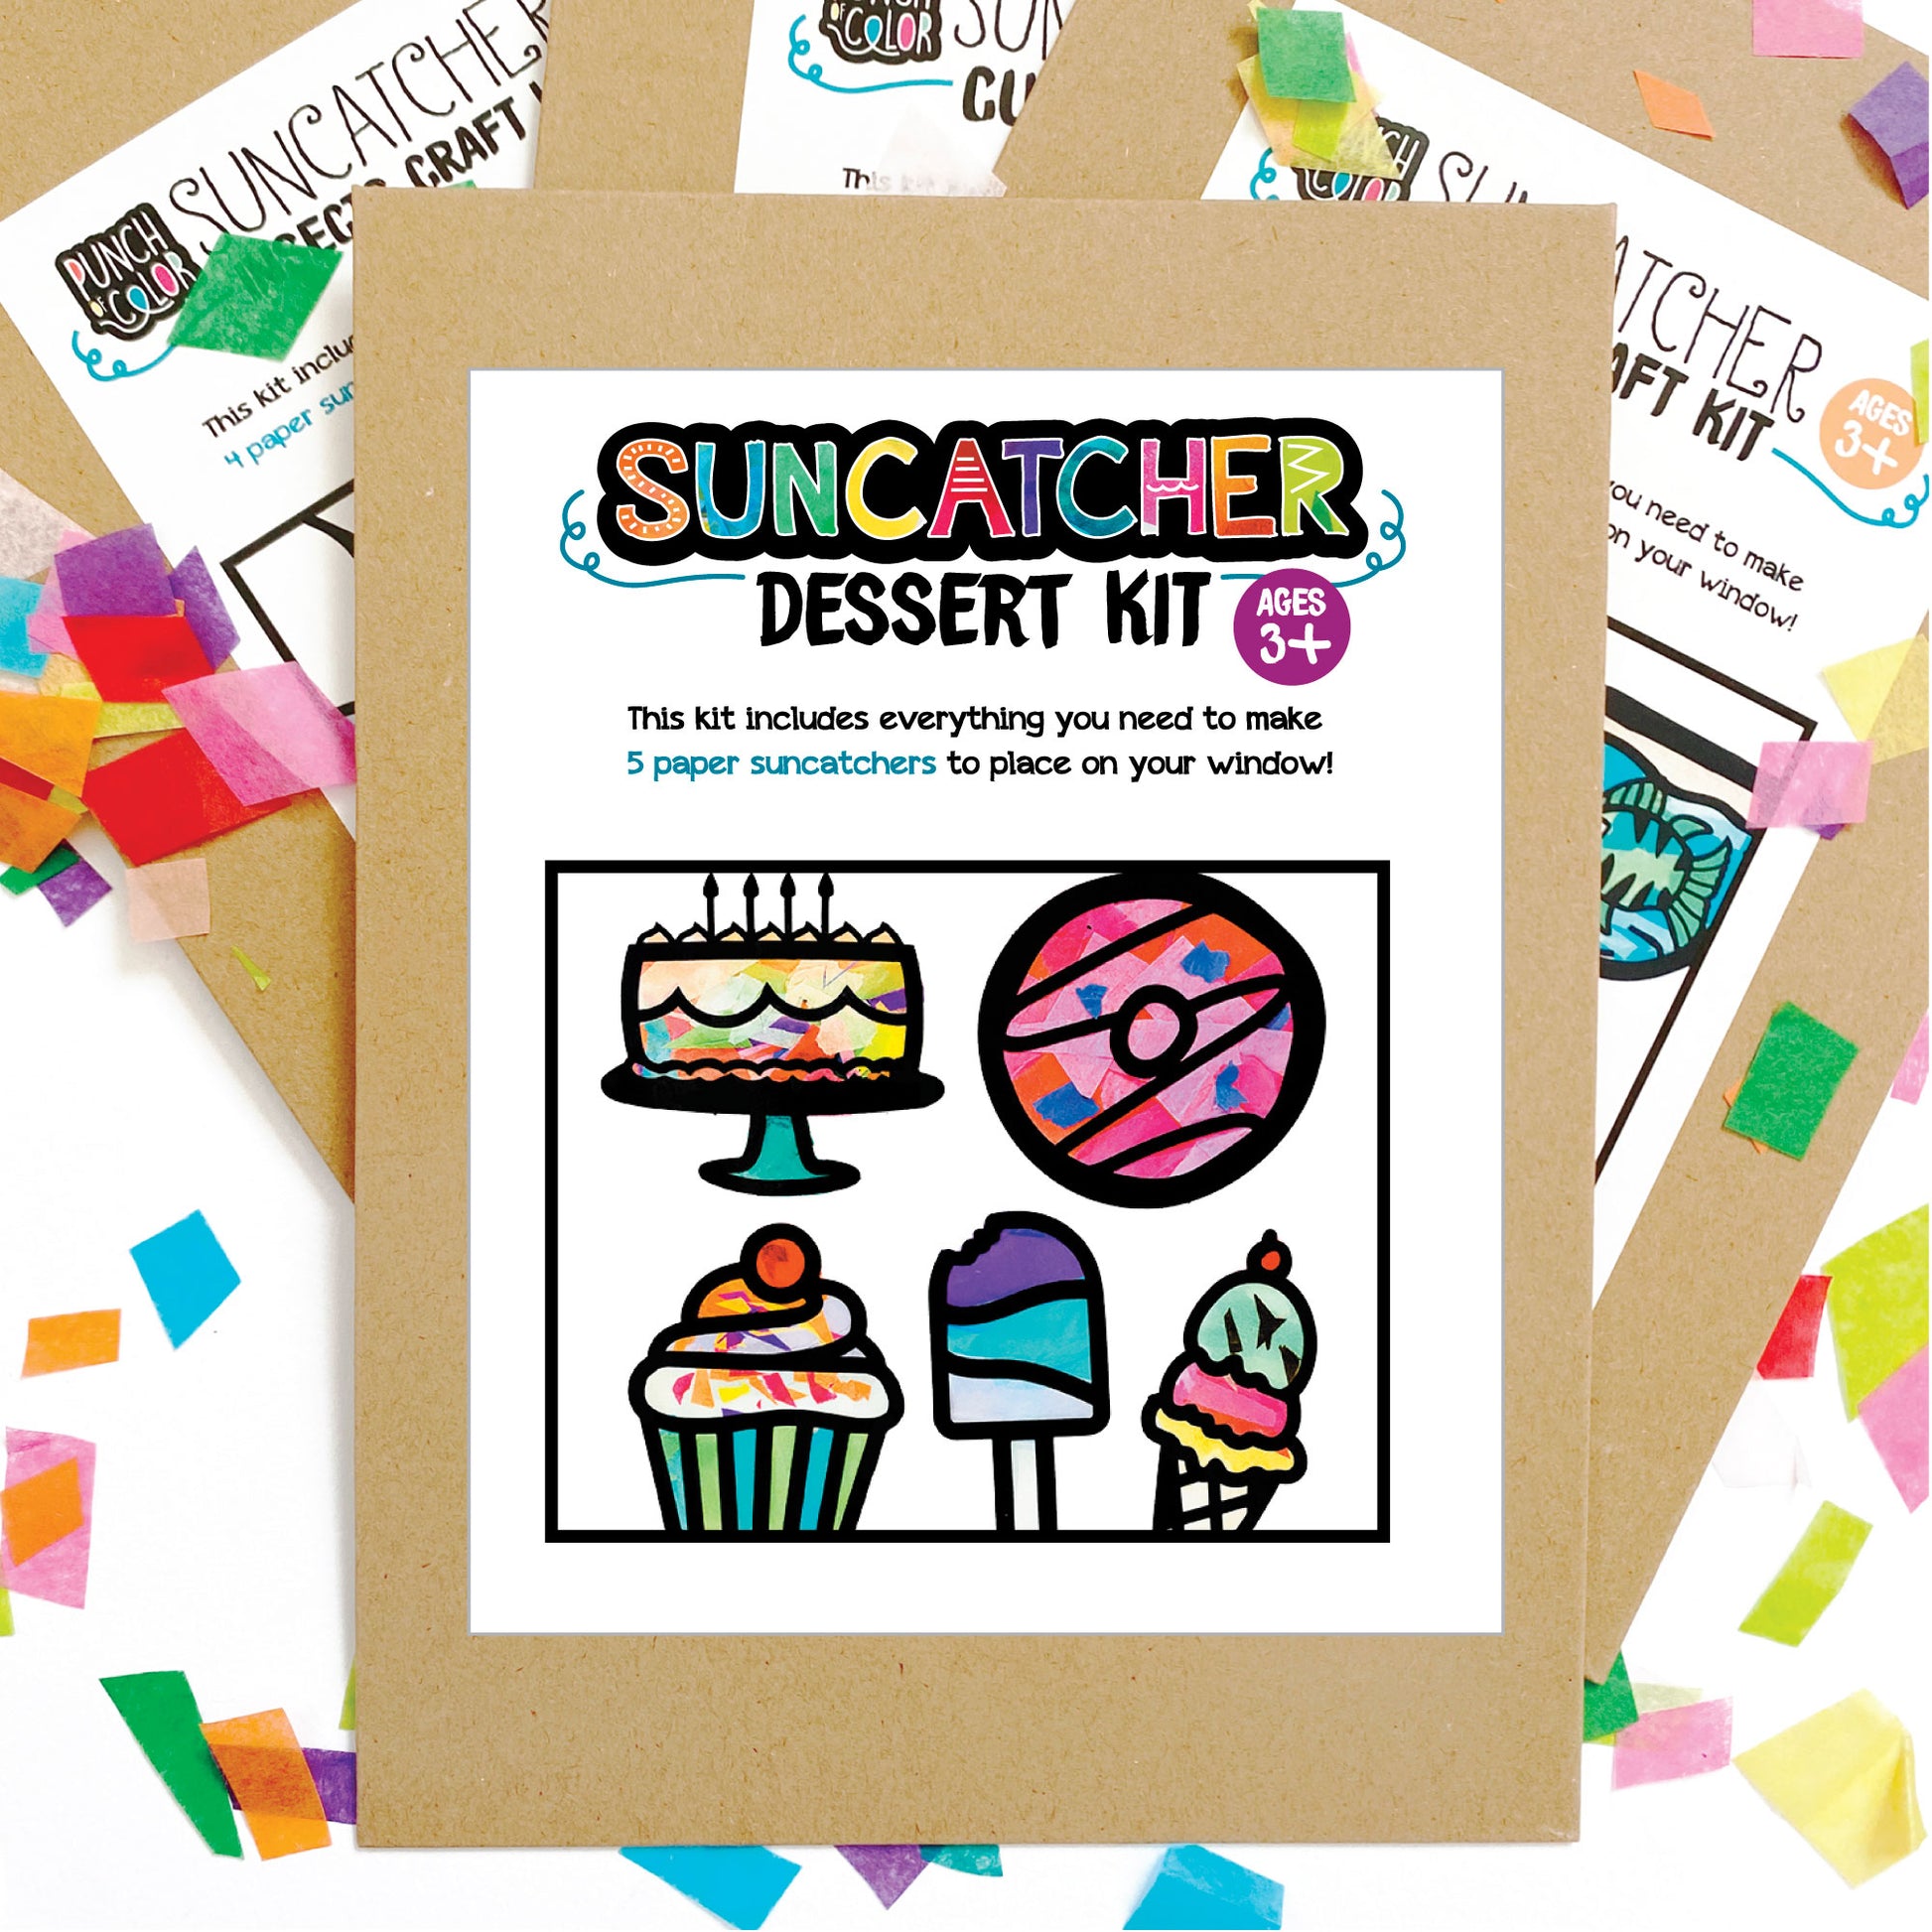 Dessert themed suncatcher arts and crafts kit, a mess-free paper based activity for toddlers and kids.